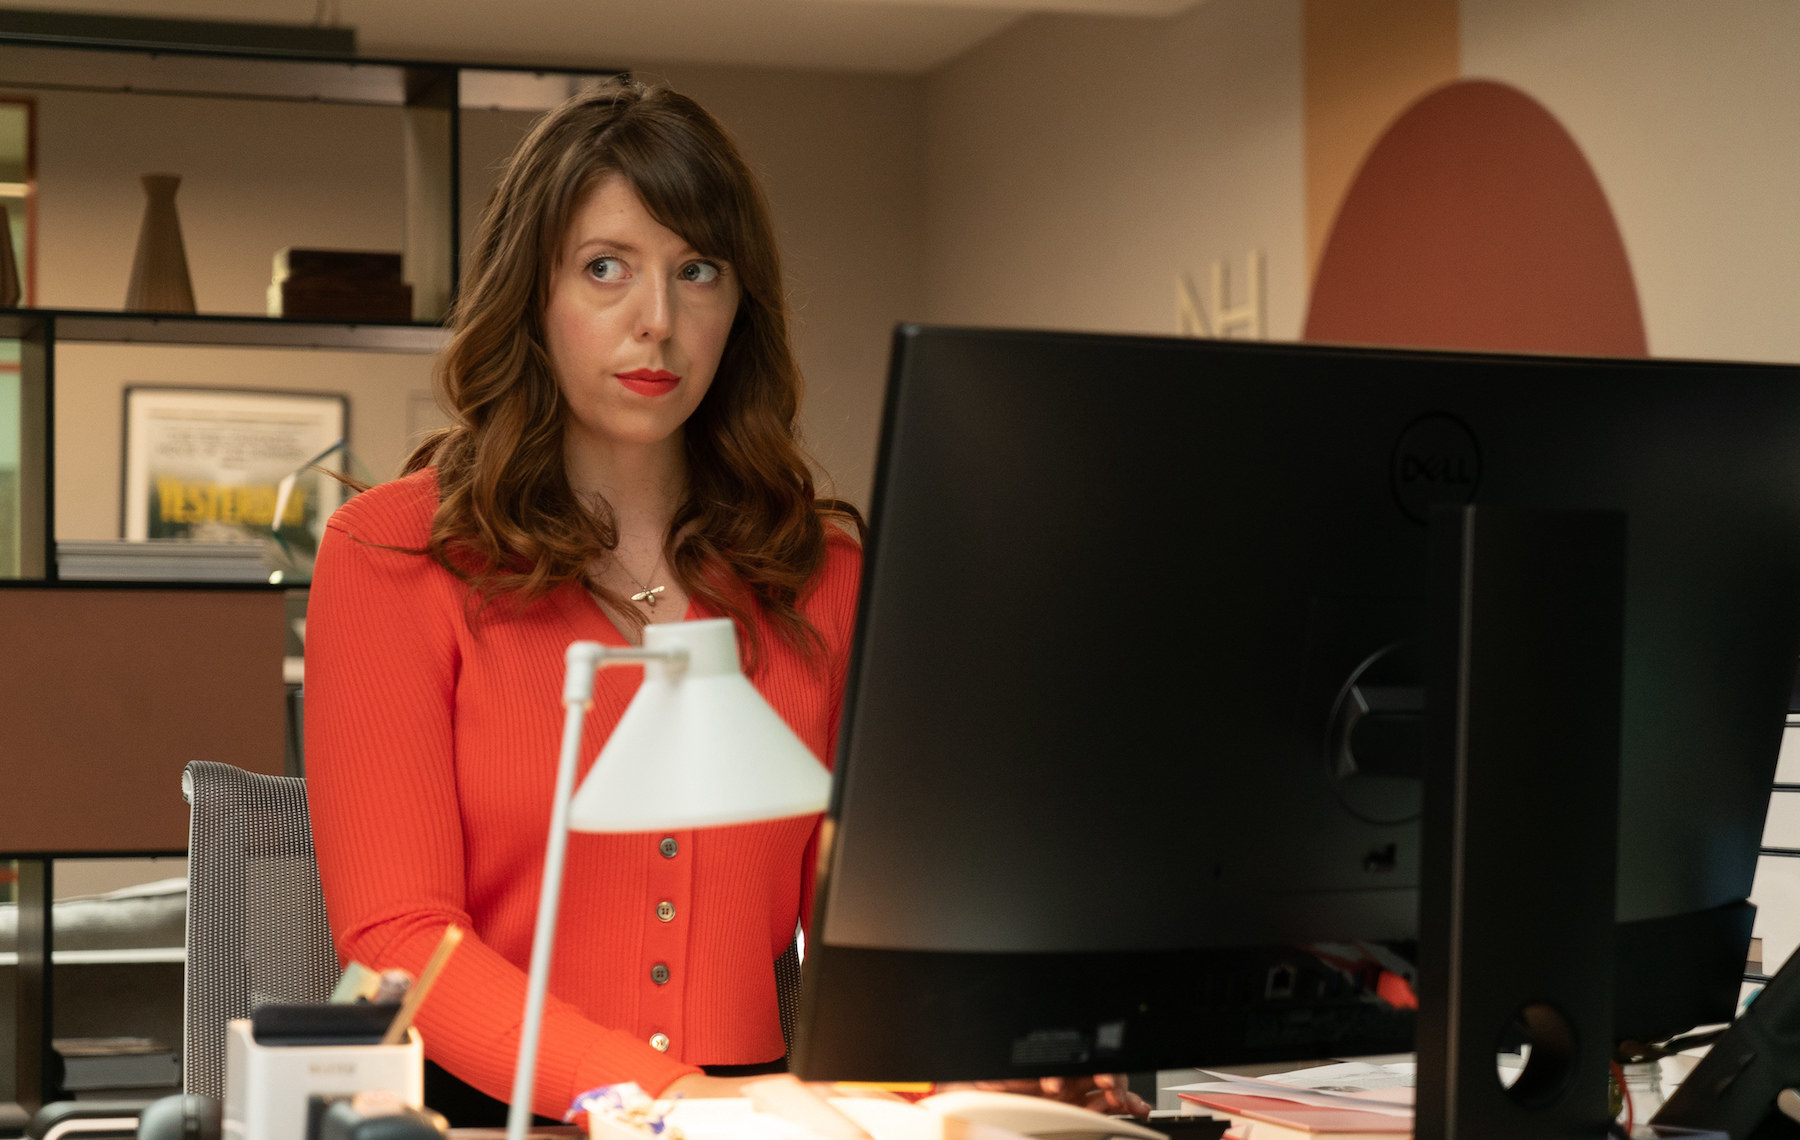 Rebecca as Julia sits at her desk in an office working at a computer and looking at something off screen